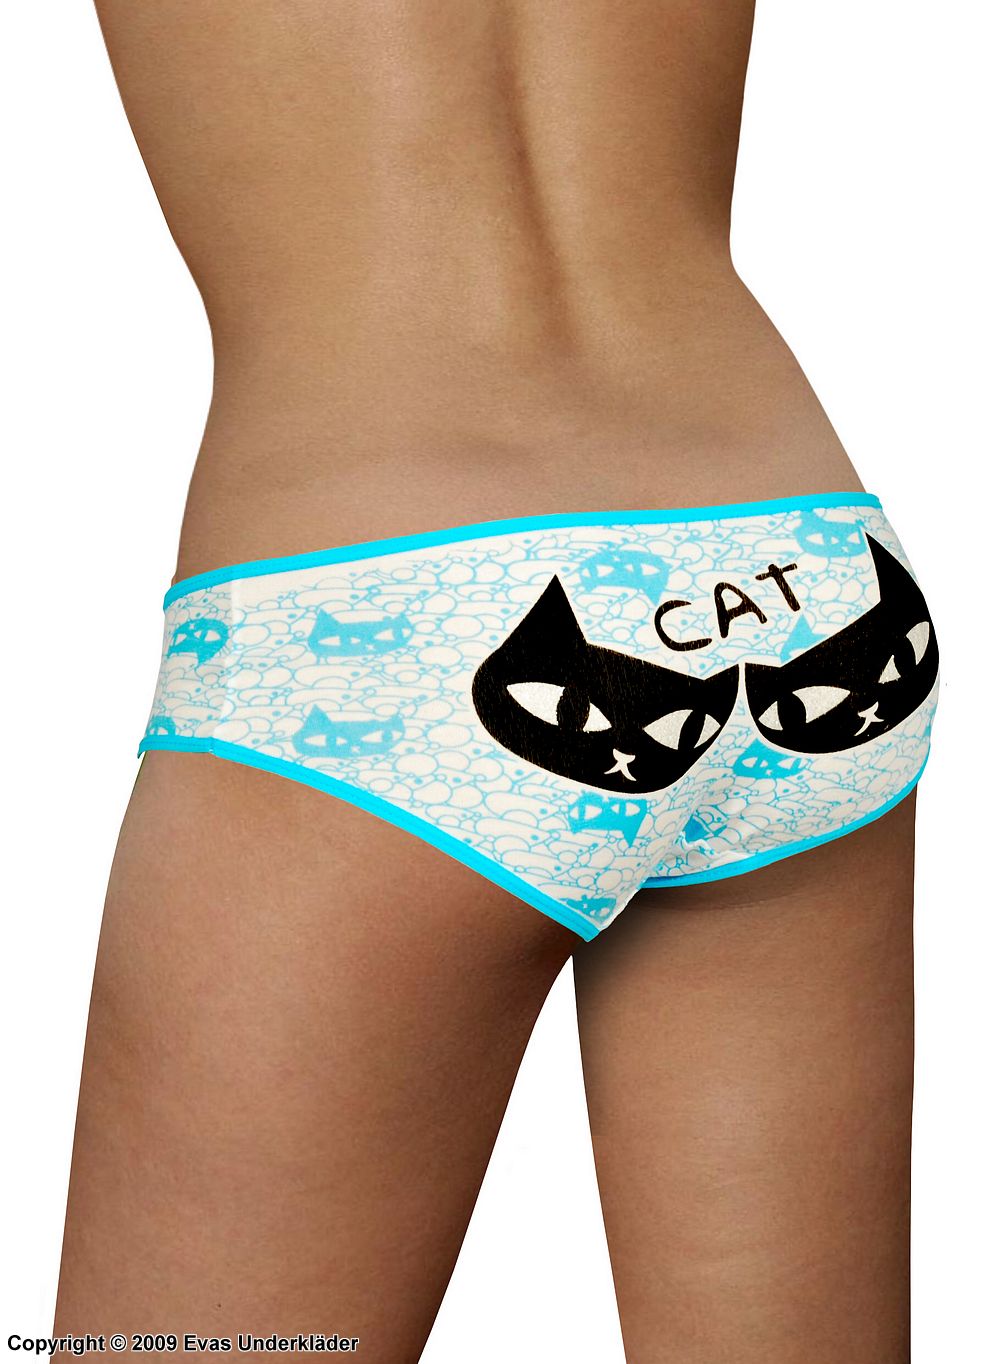 Panty with cats